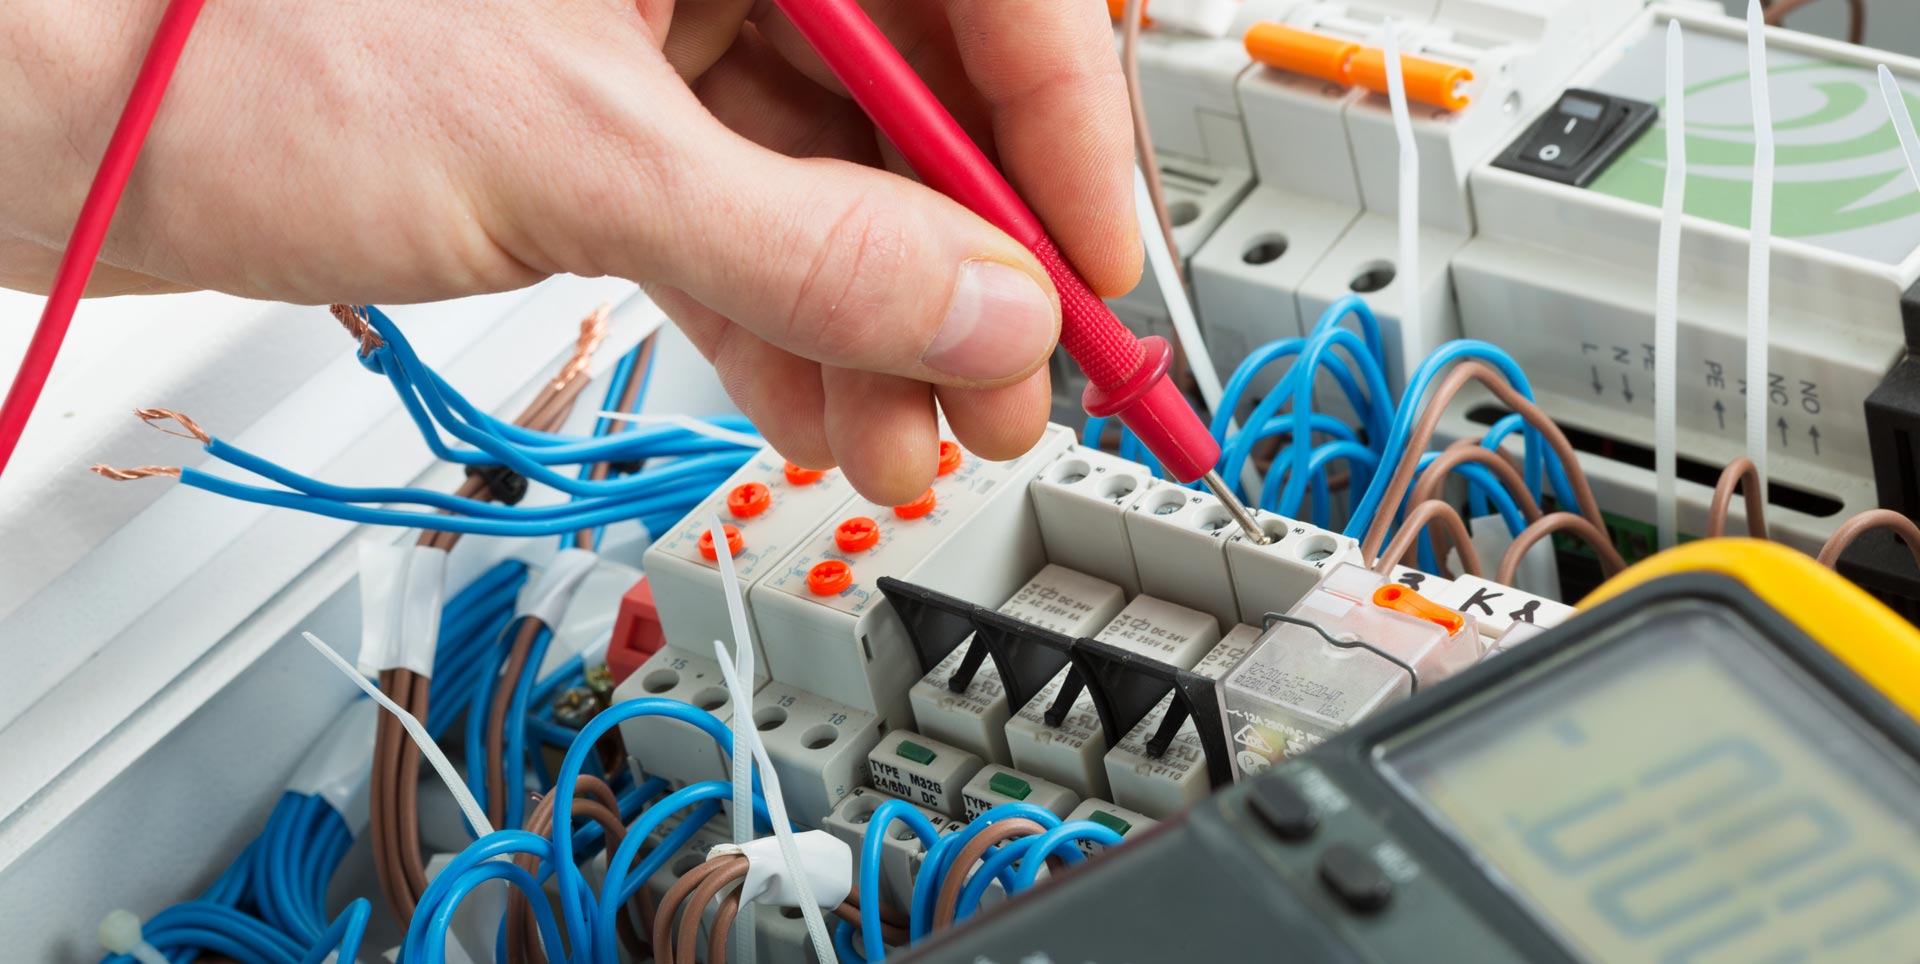 Hire The Top Quality Electrical Services For Electrical Requirements